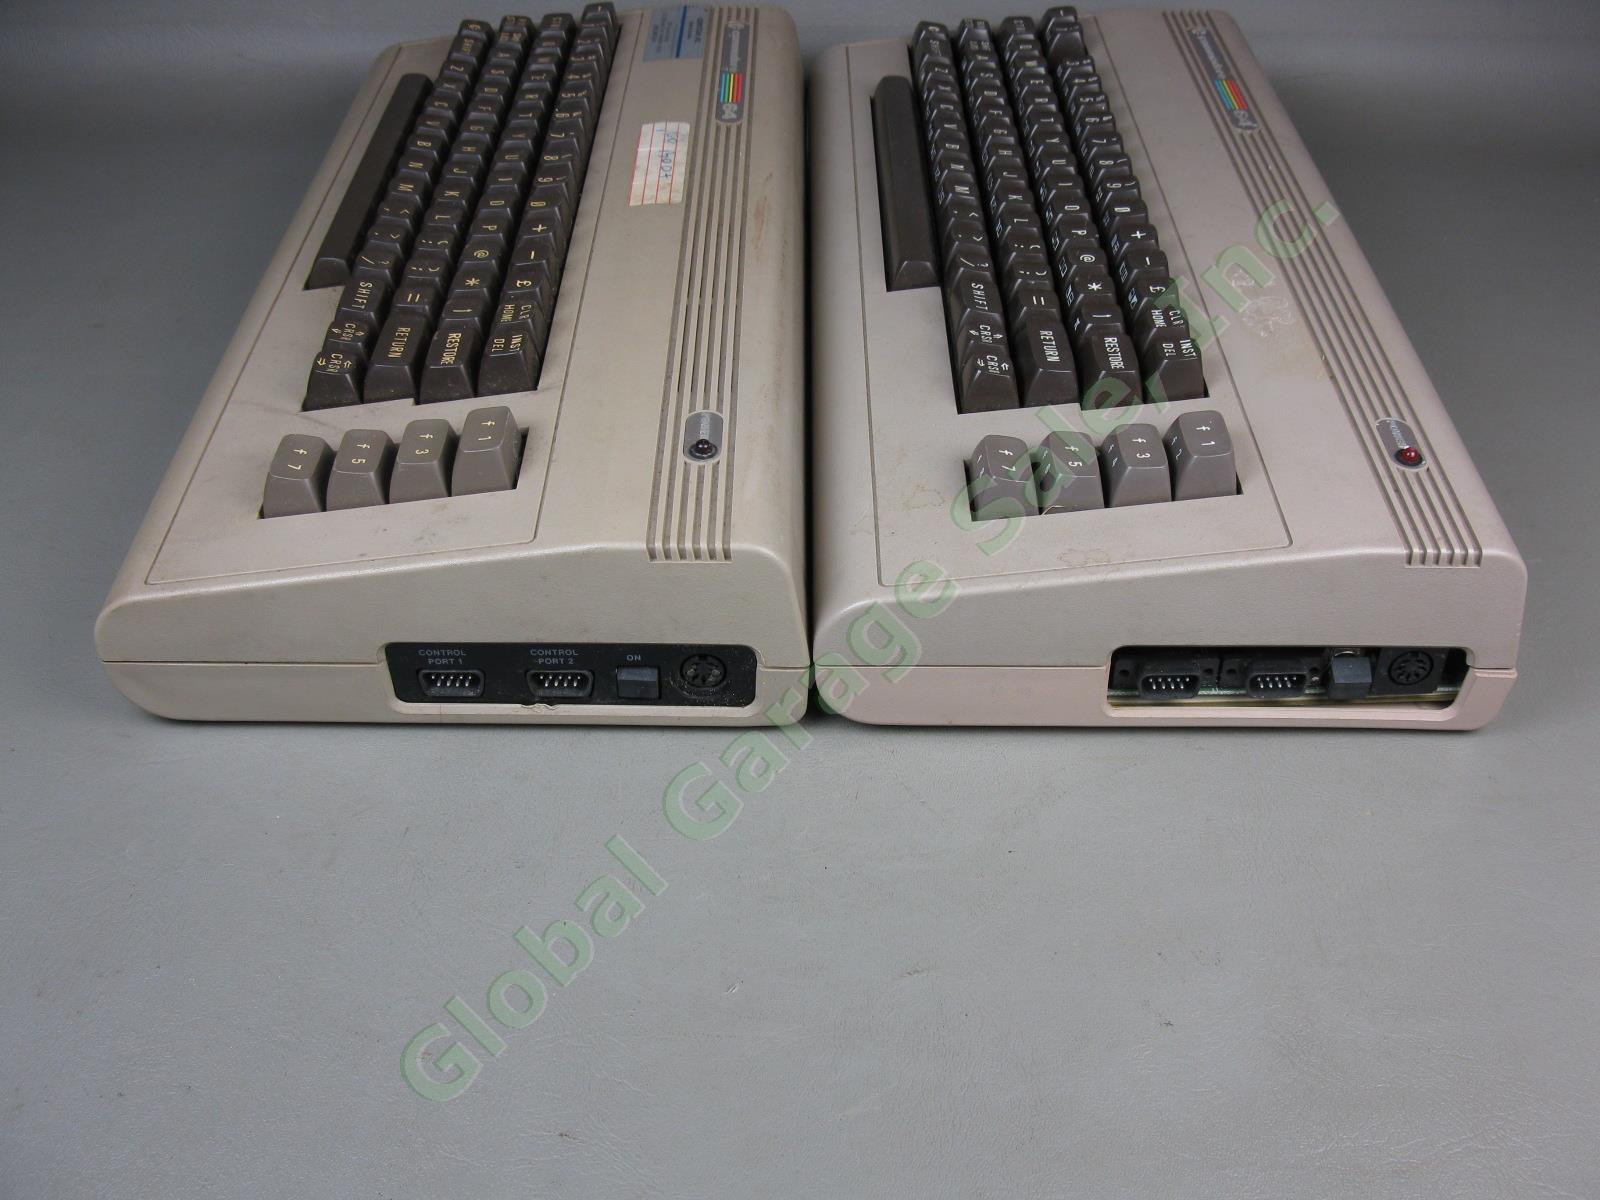 2 Vtg Commodore 64 Personal Computers Lot Untested As-Is Parts/Repair No Power?? 2